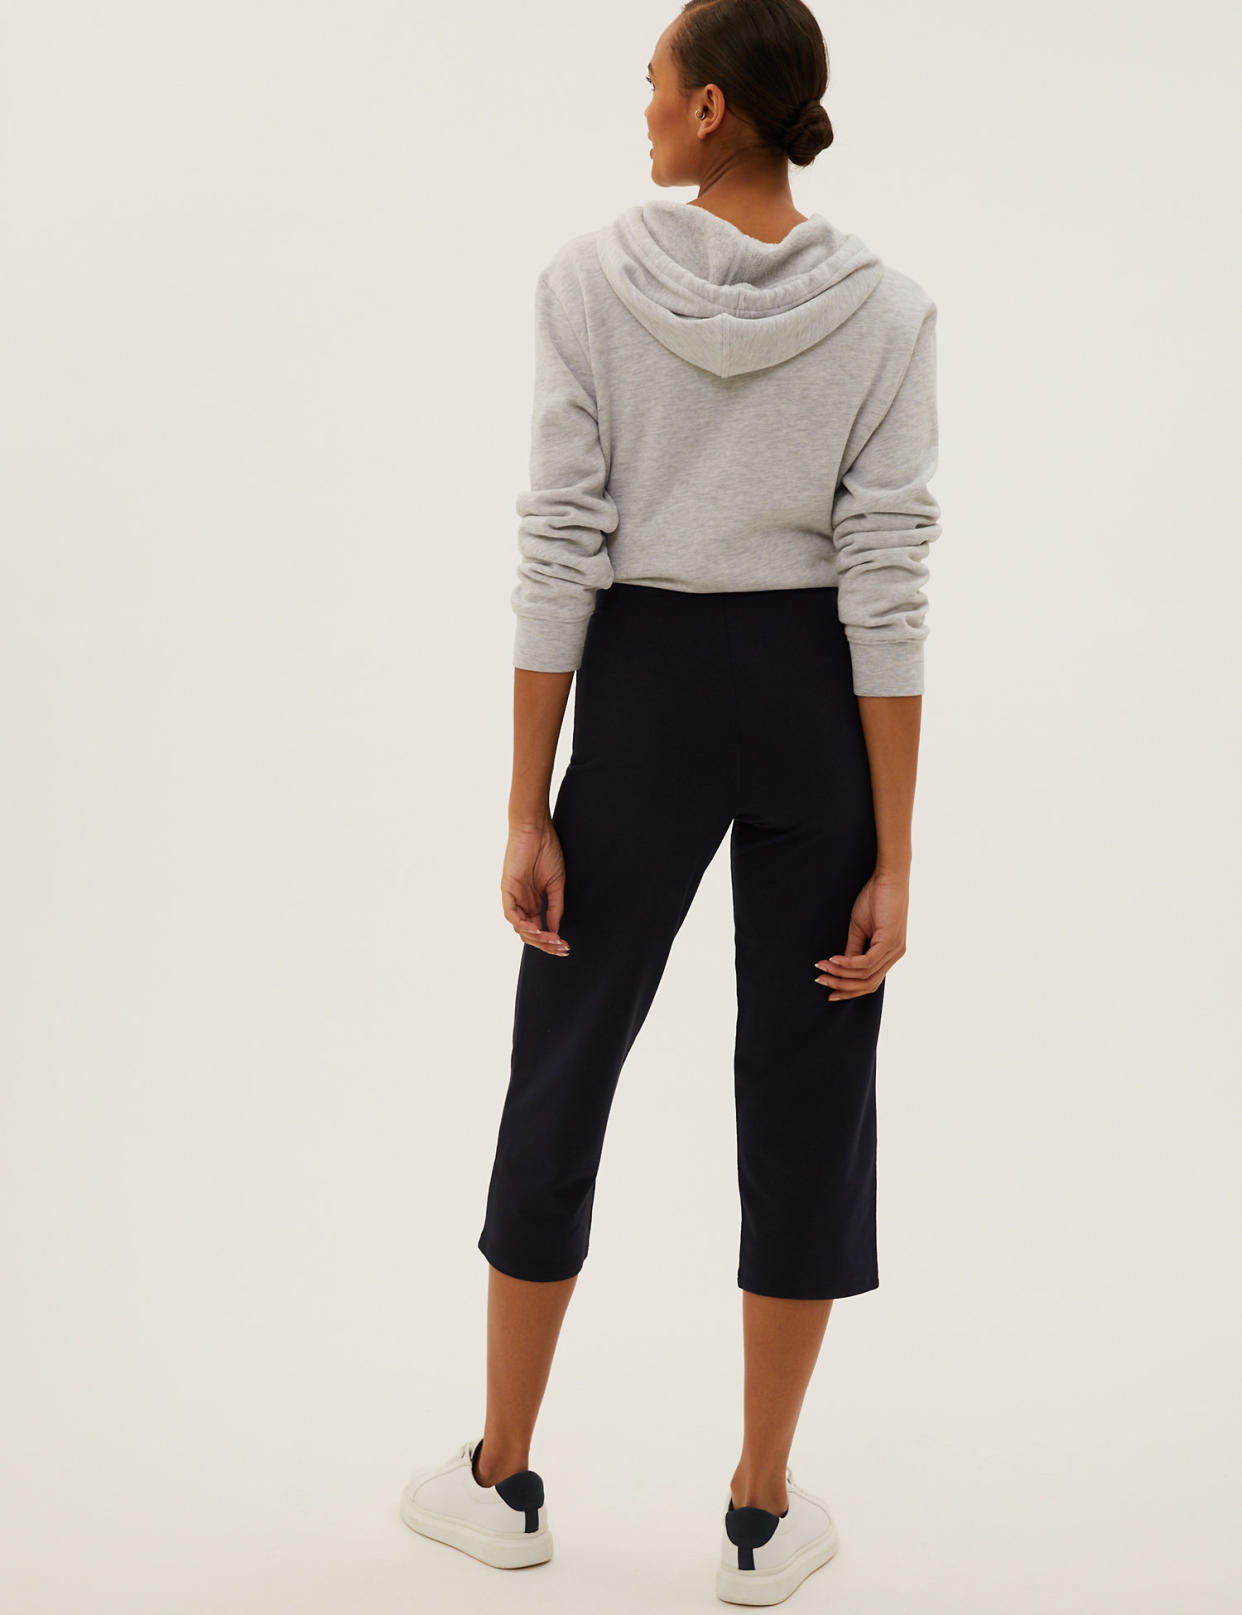 The flattering straight-leg style has a high elasticated waist for comfort. (Marks & Spencer)